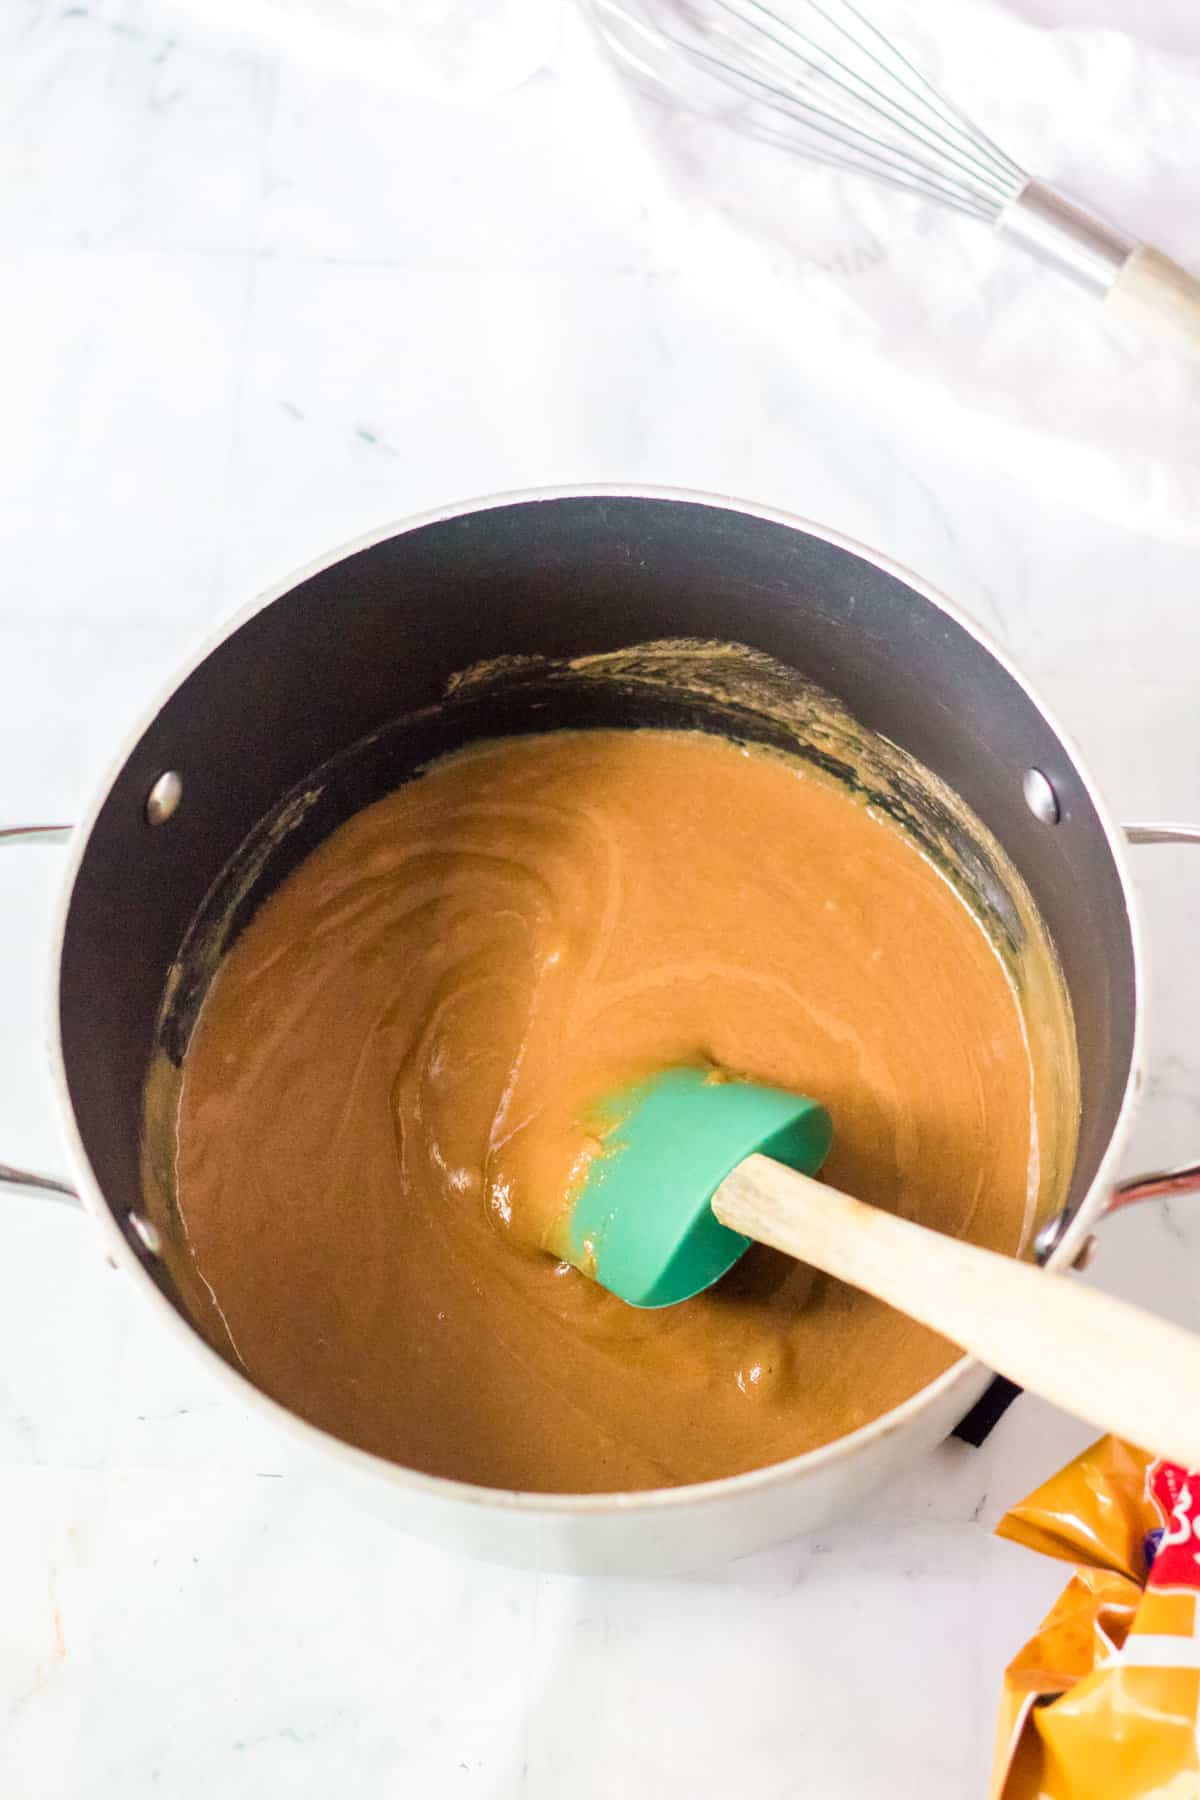 Saucepan with peanut butter mixture and rubber spatula.